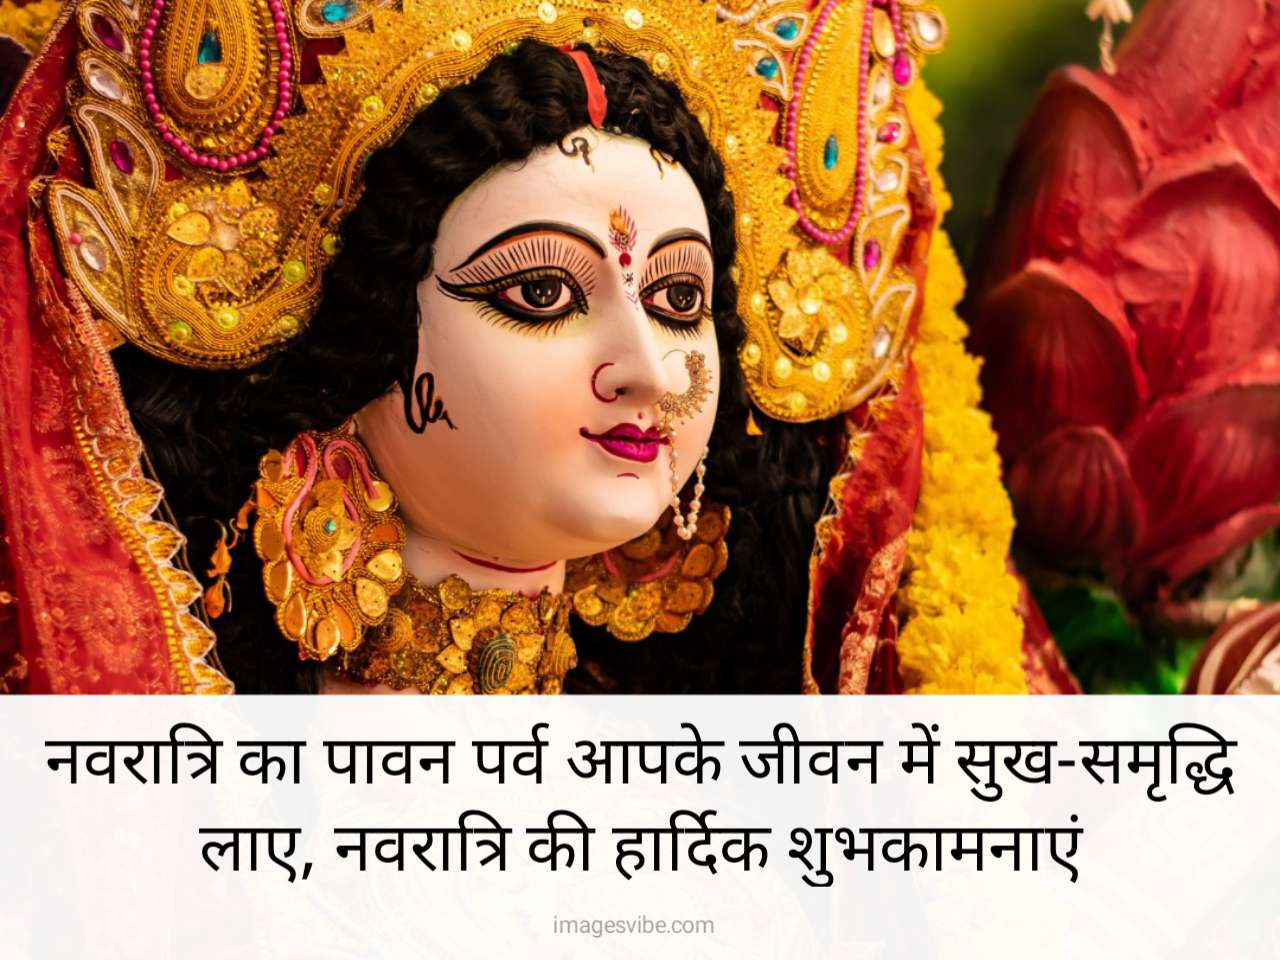 Happy Navratri Images With Quotes In Hindi